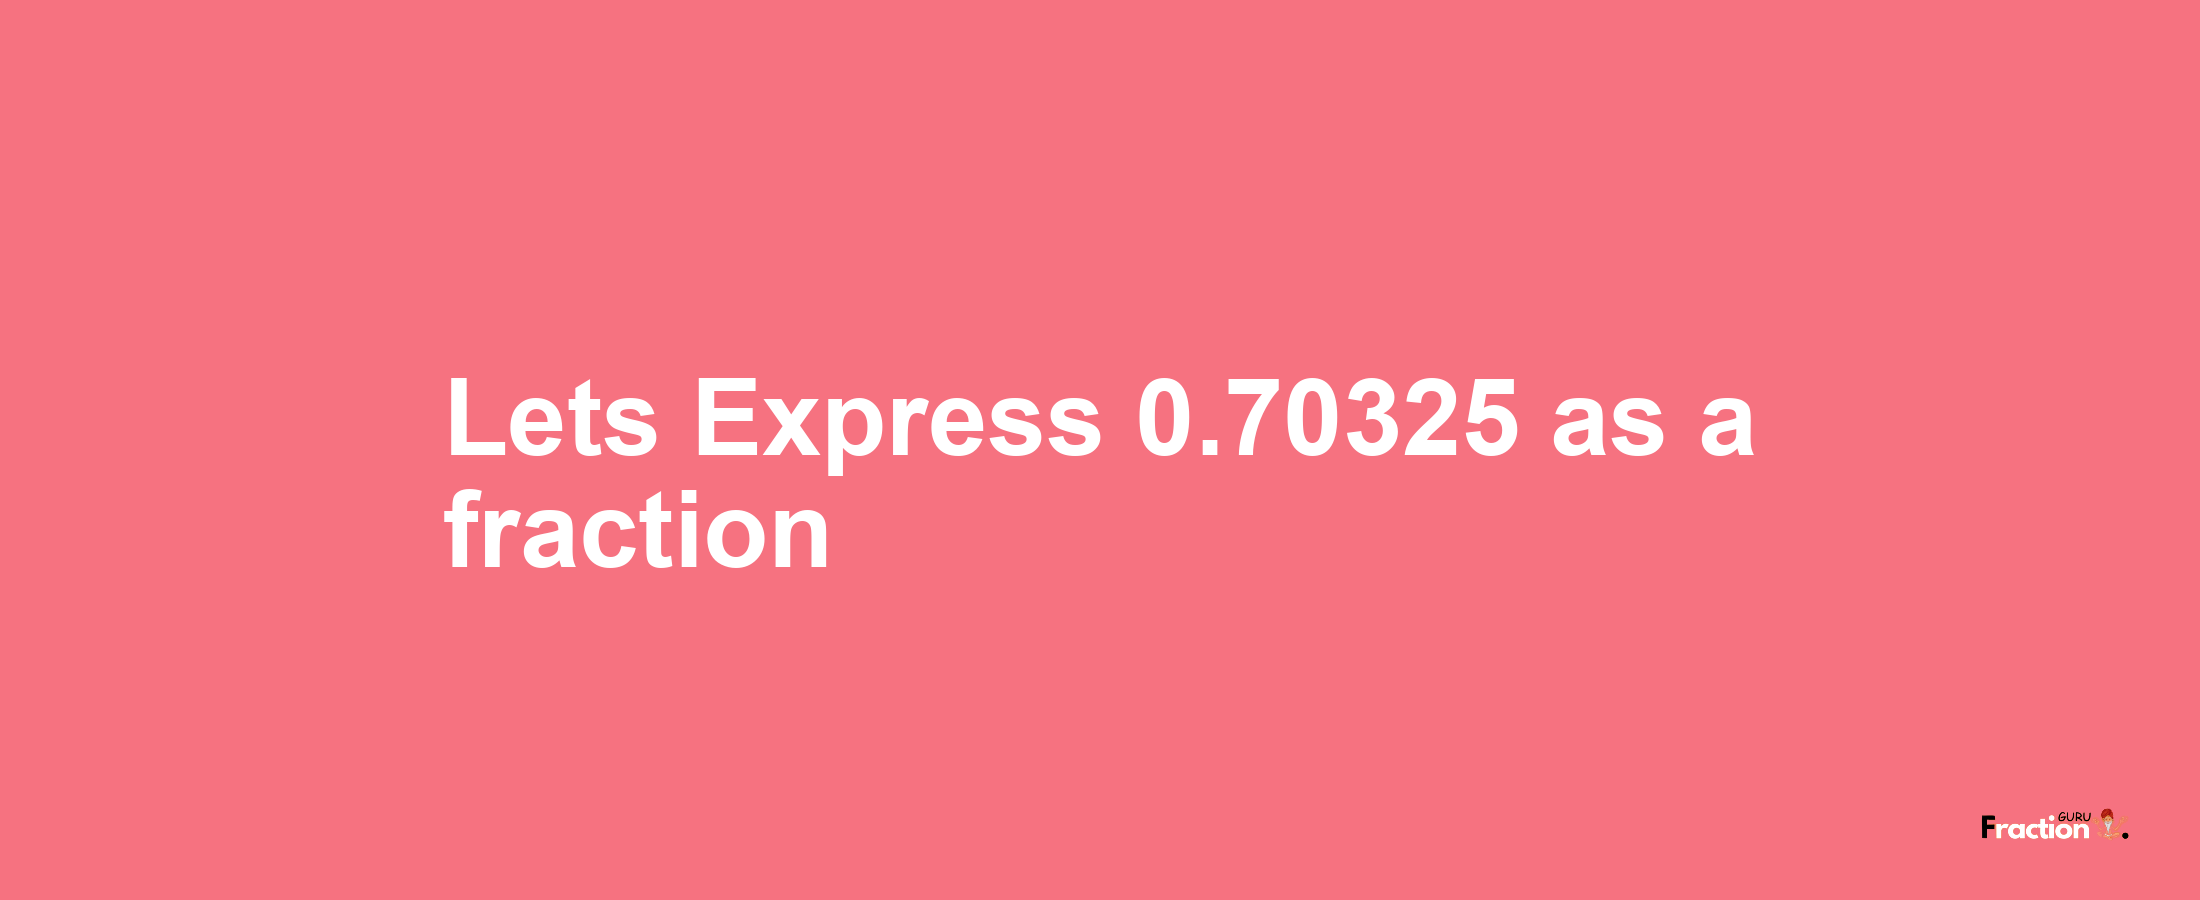 Lets Express 0.70325 as afraction